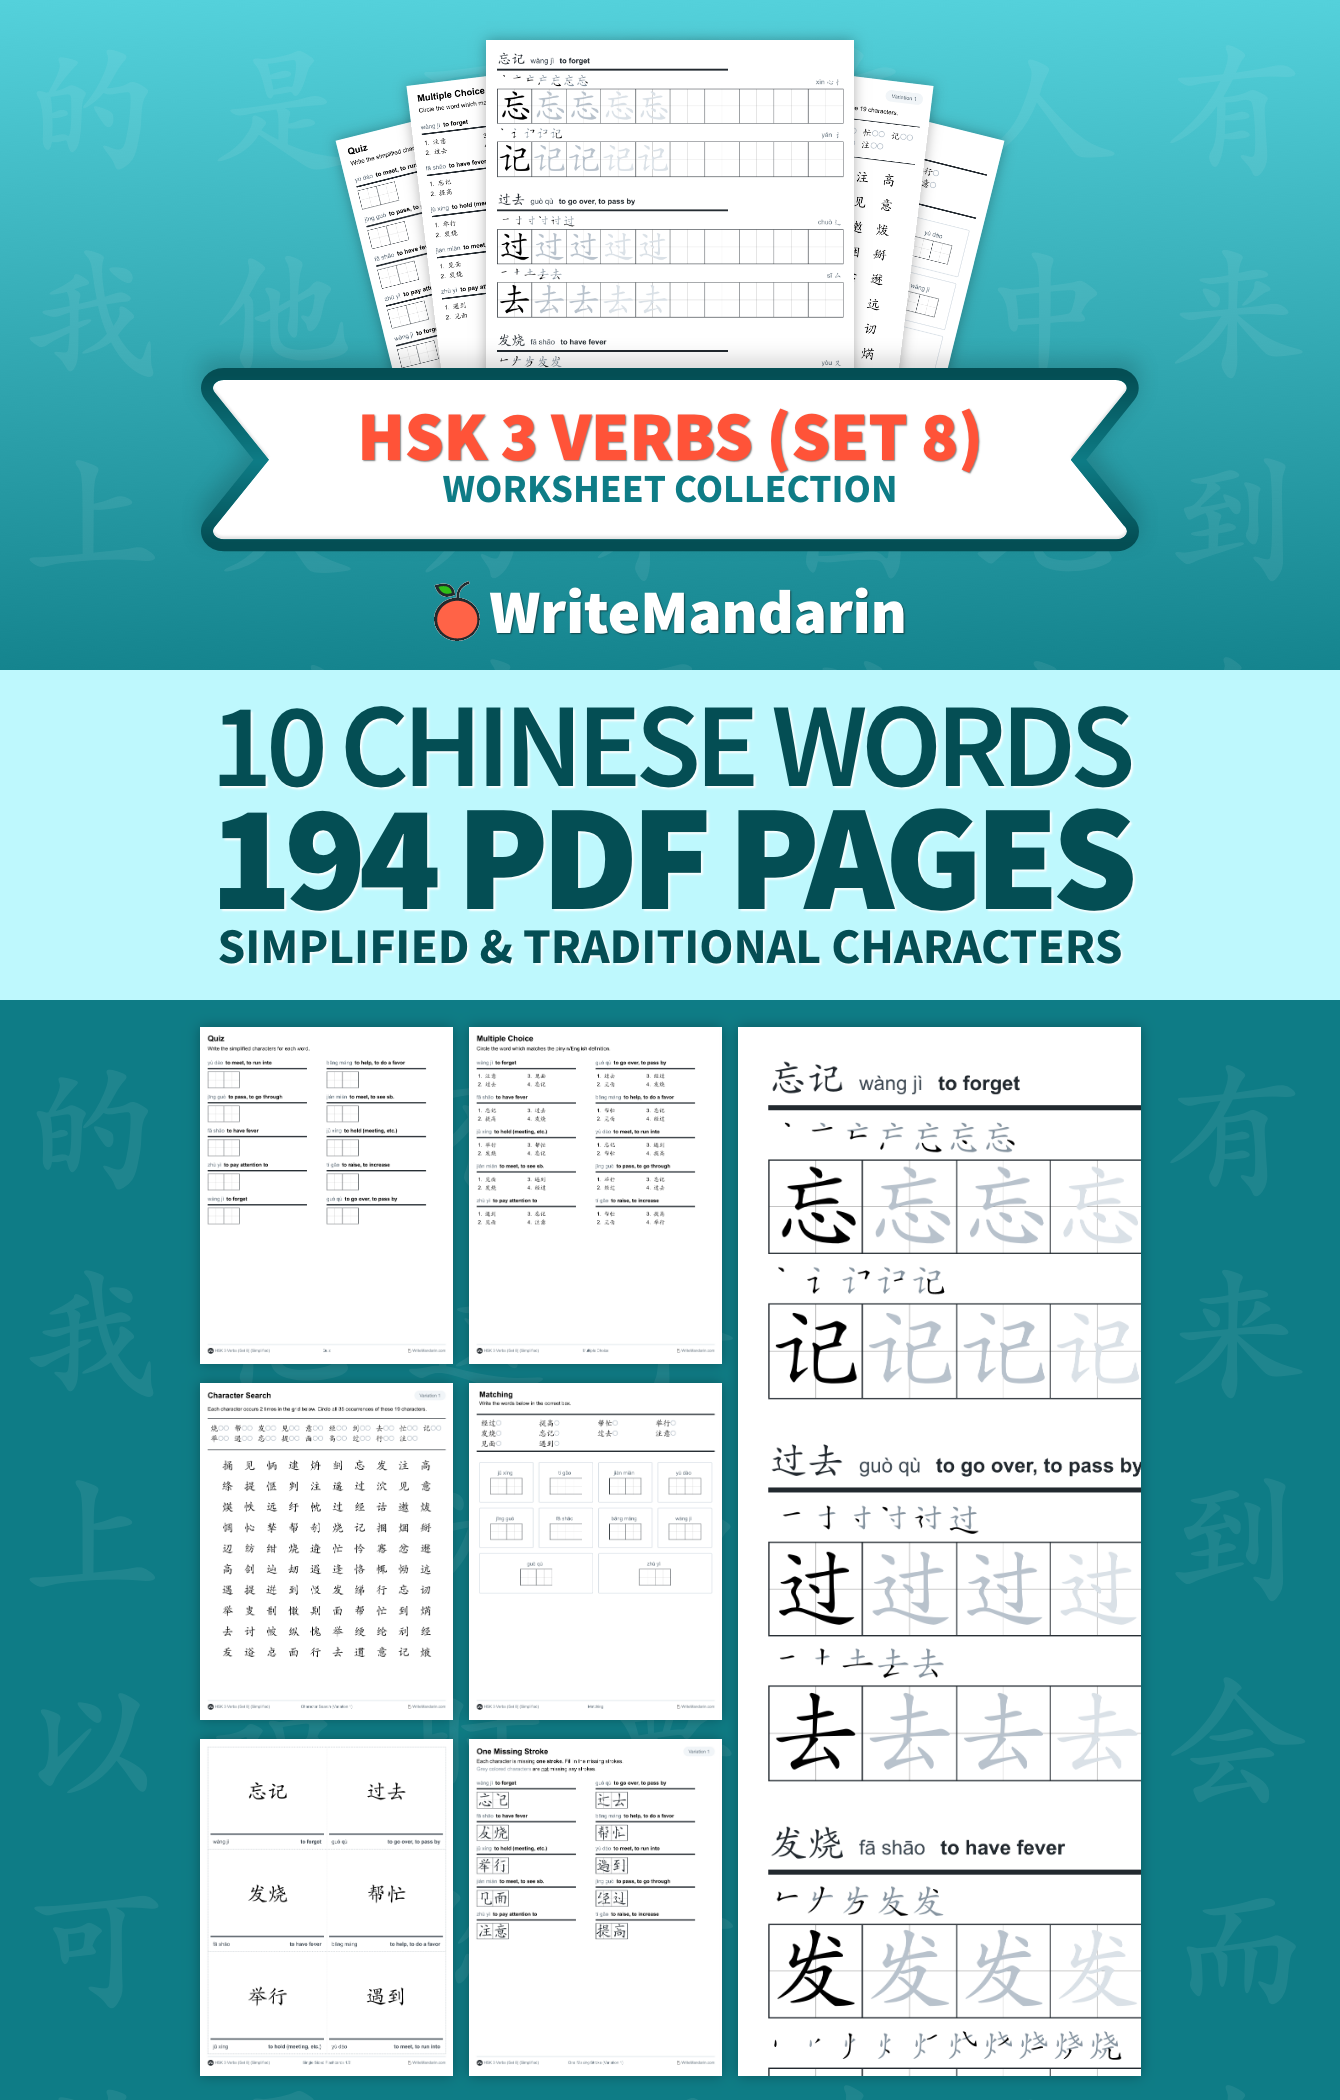 Preview image of HSK 3 Verbs (Set 8) worksheet collection